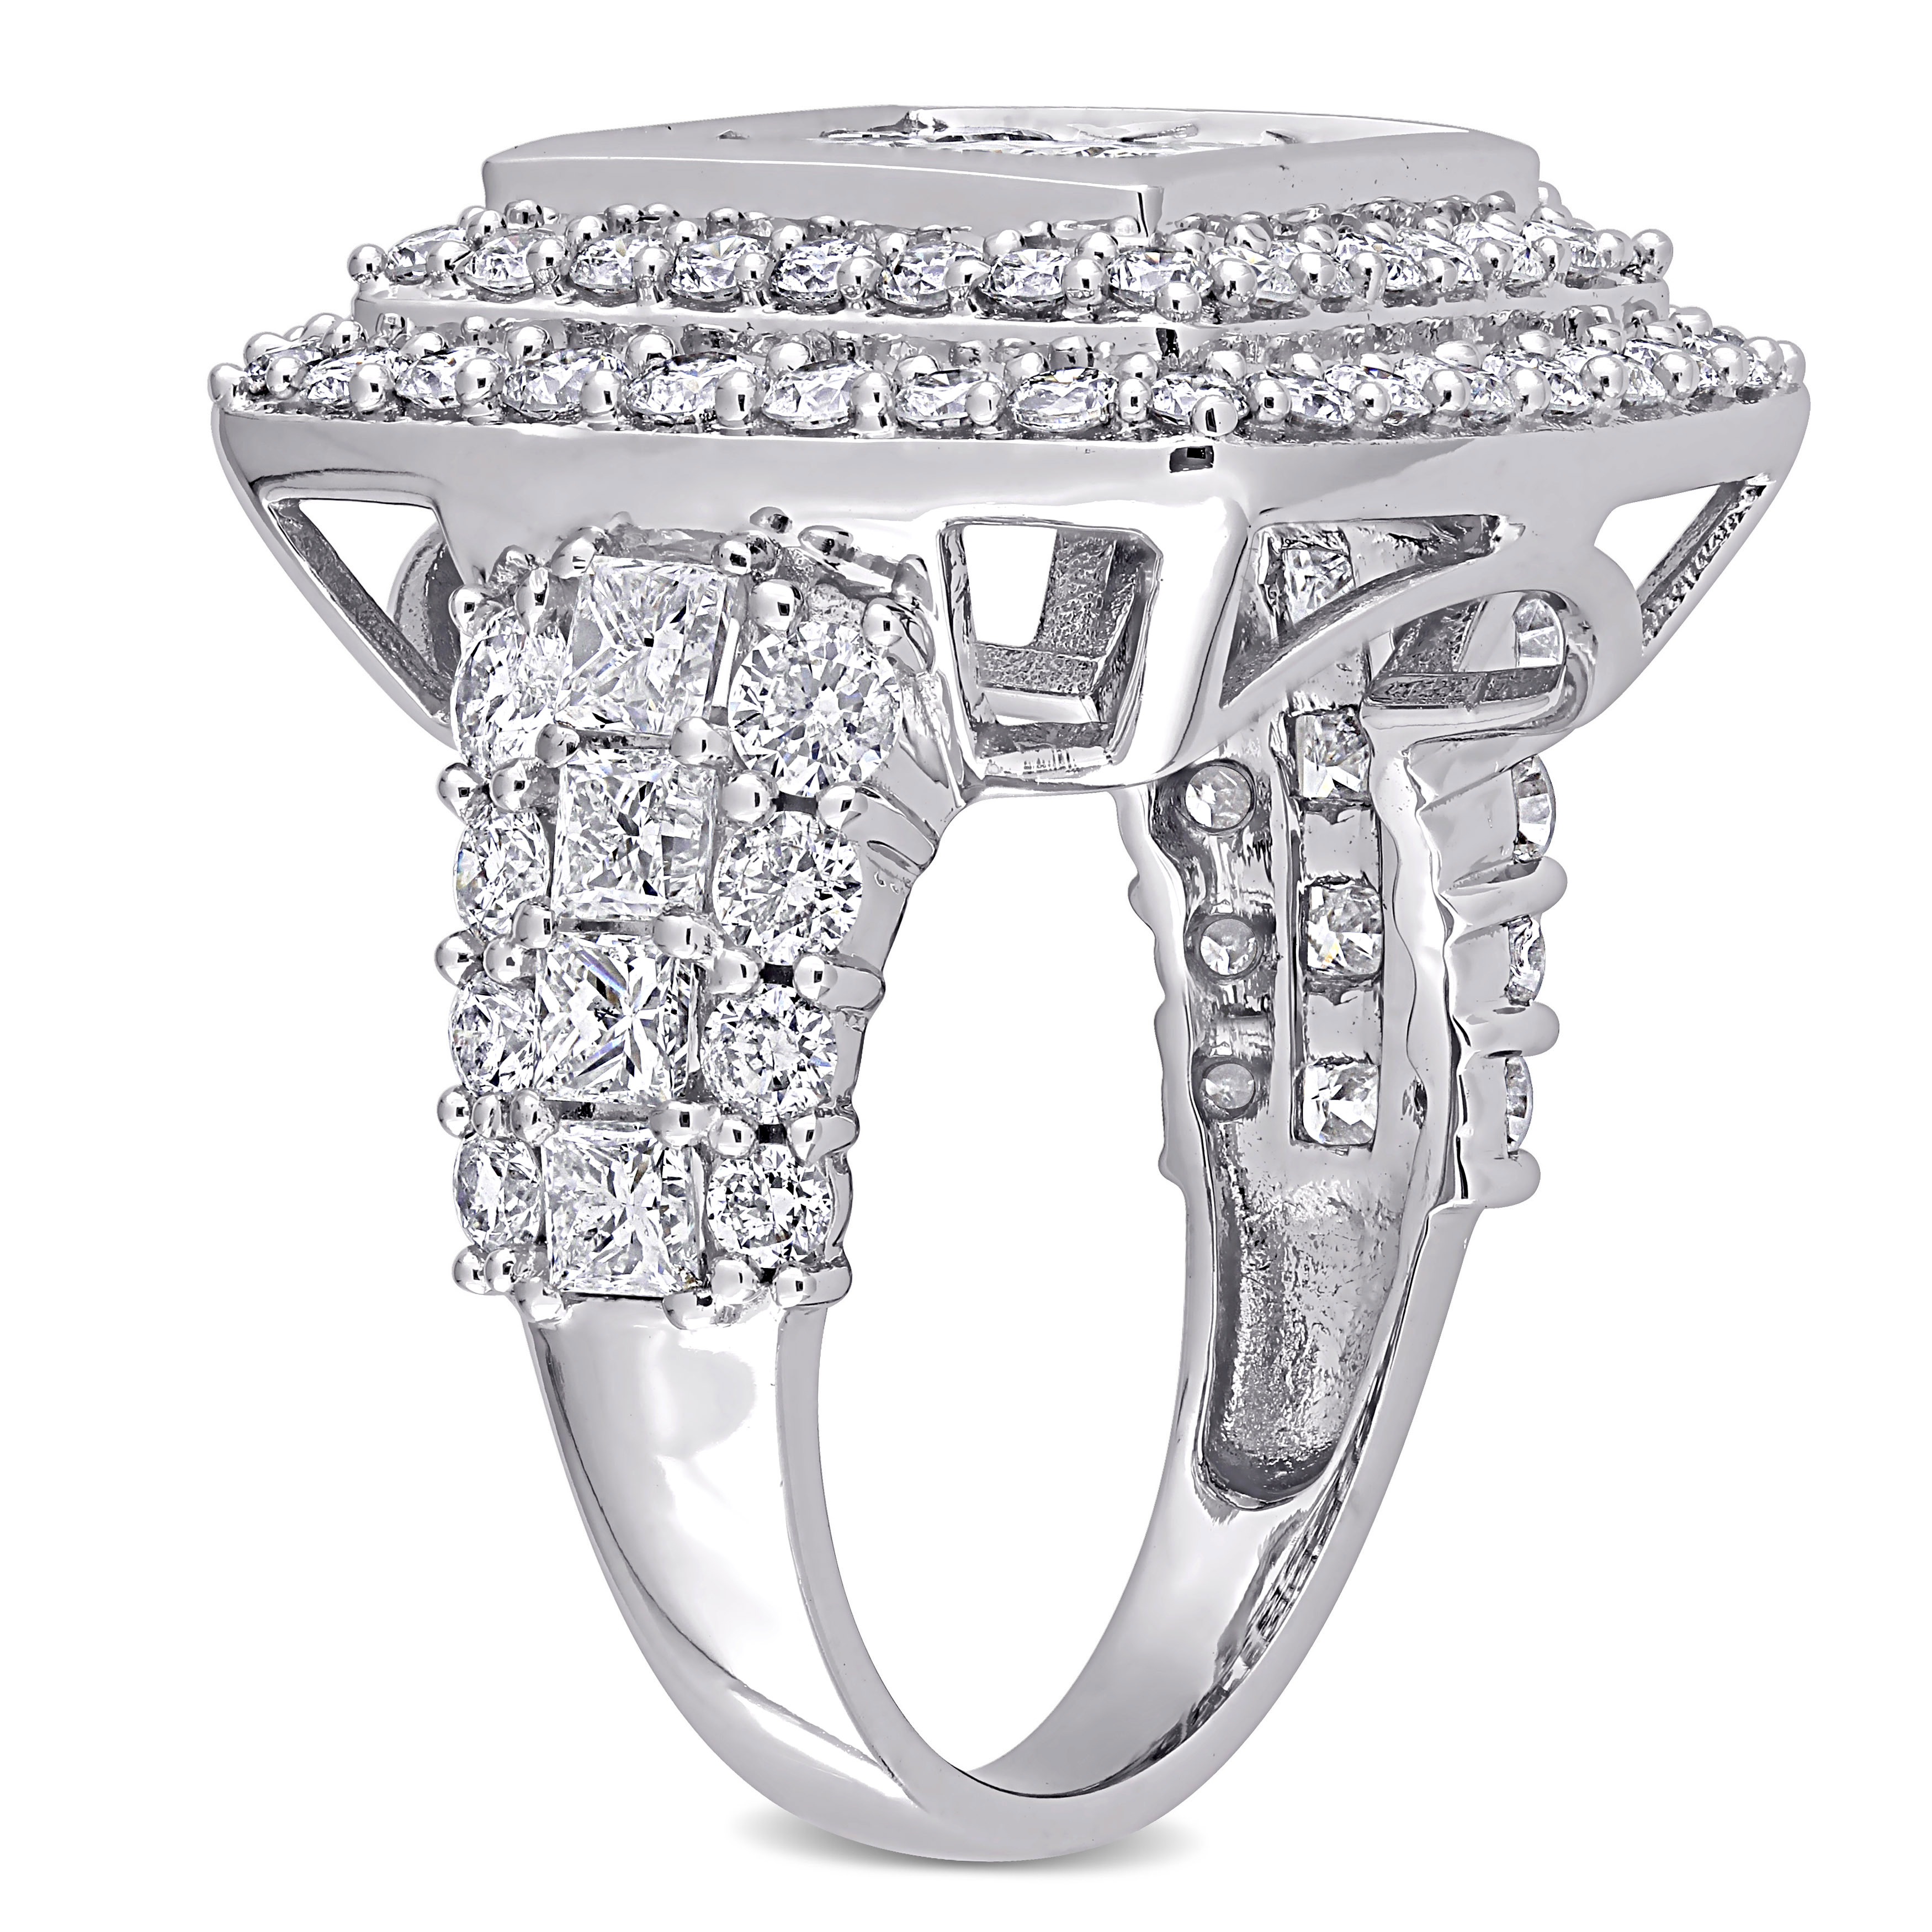 5 CT TW Princess and Round Diamond Double Halo Engagement Ring in 14k White Gold